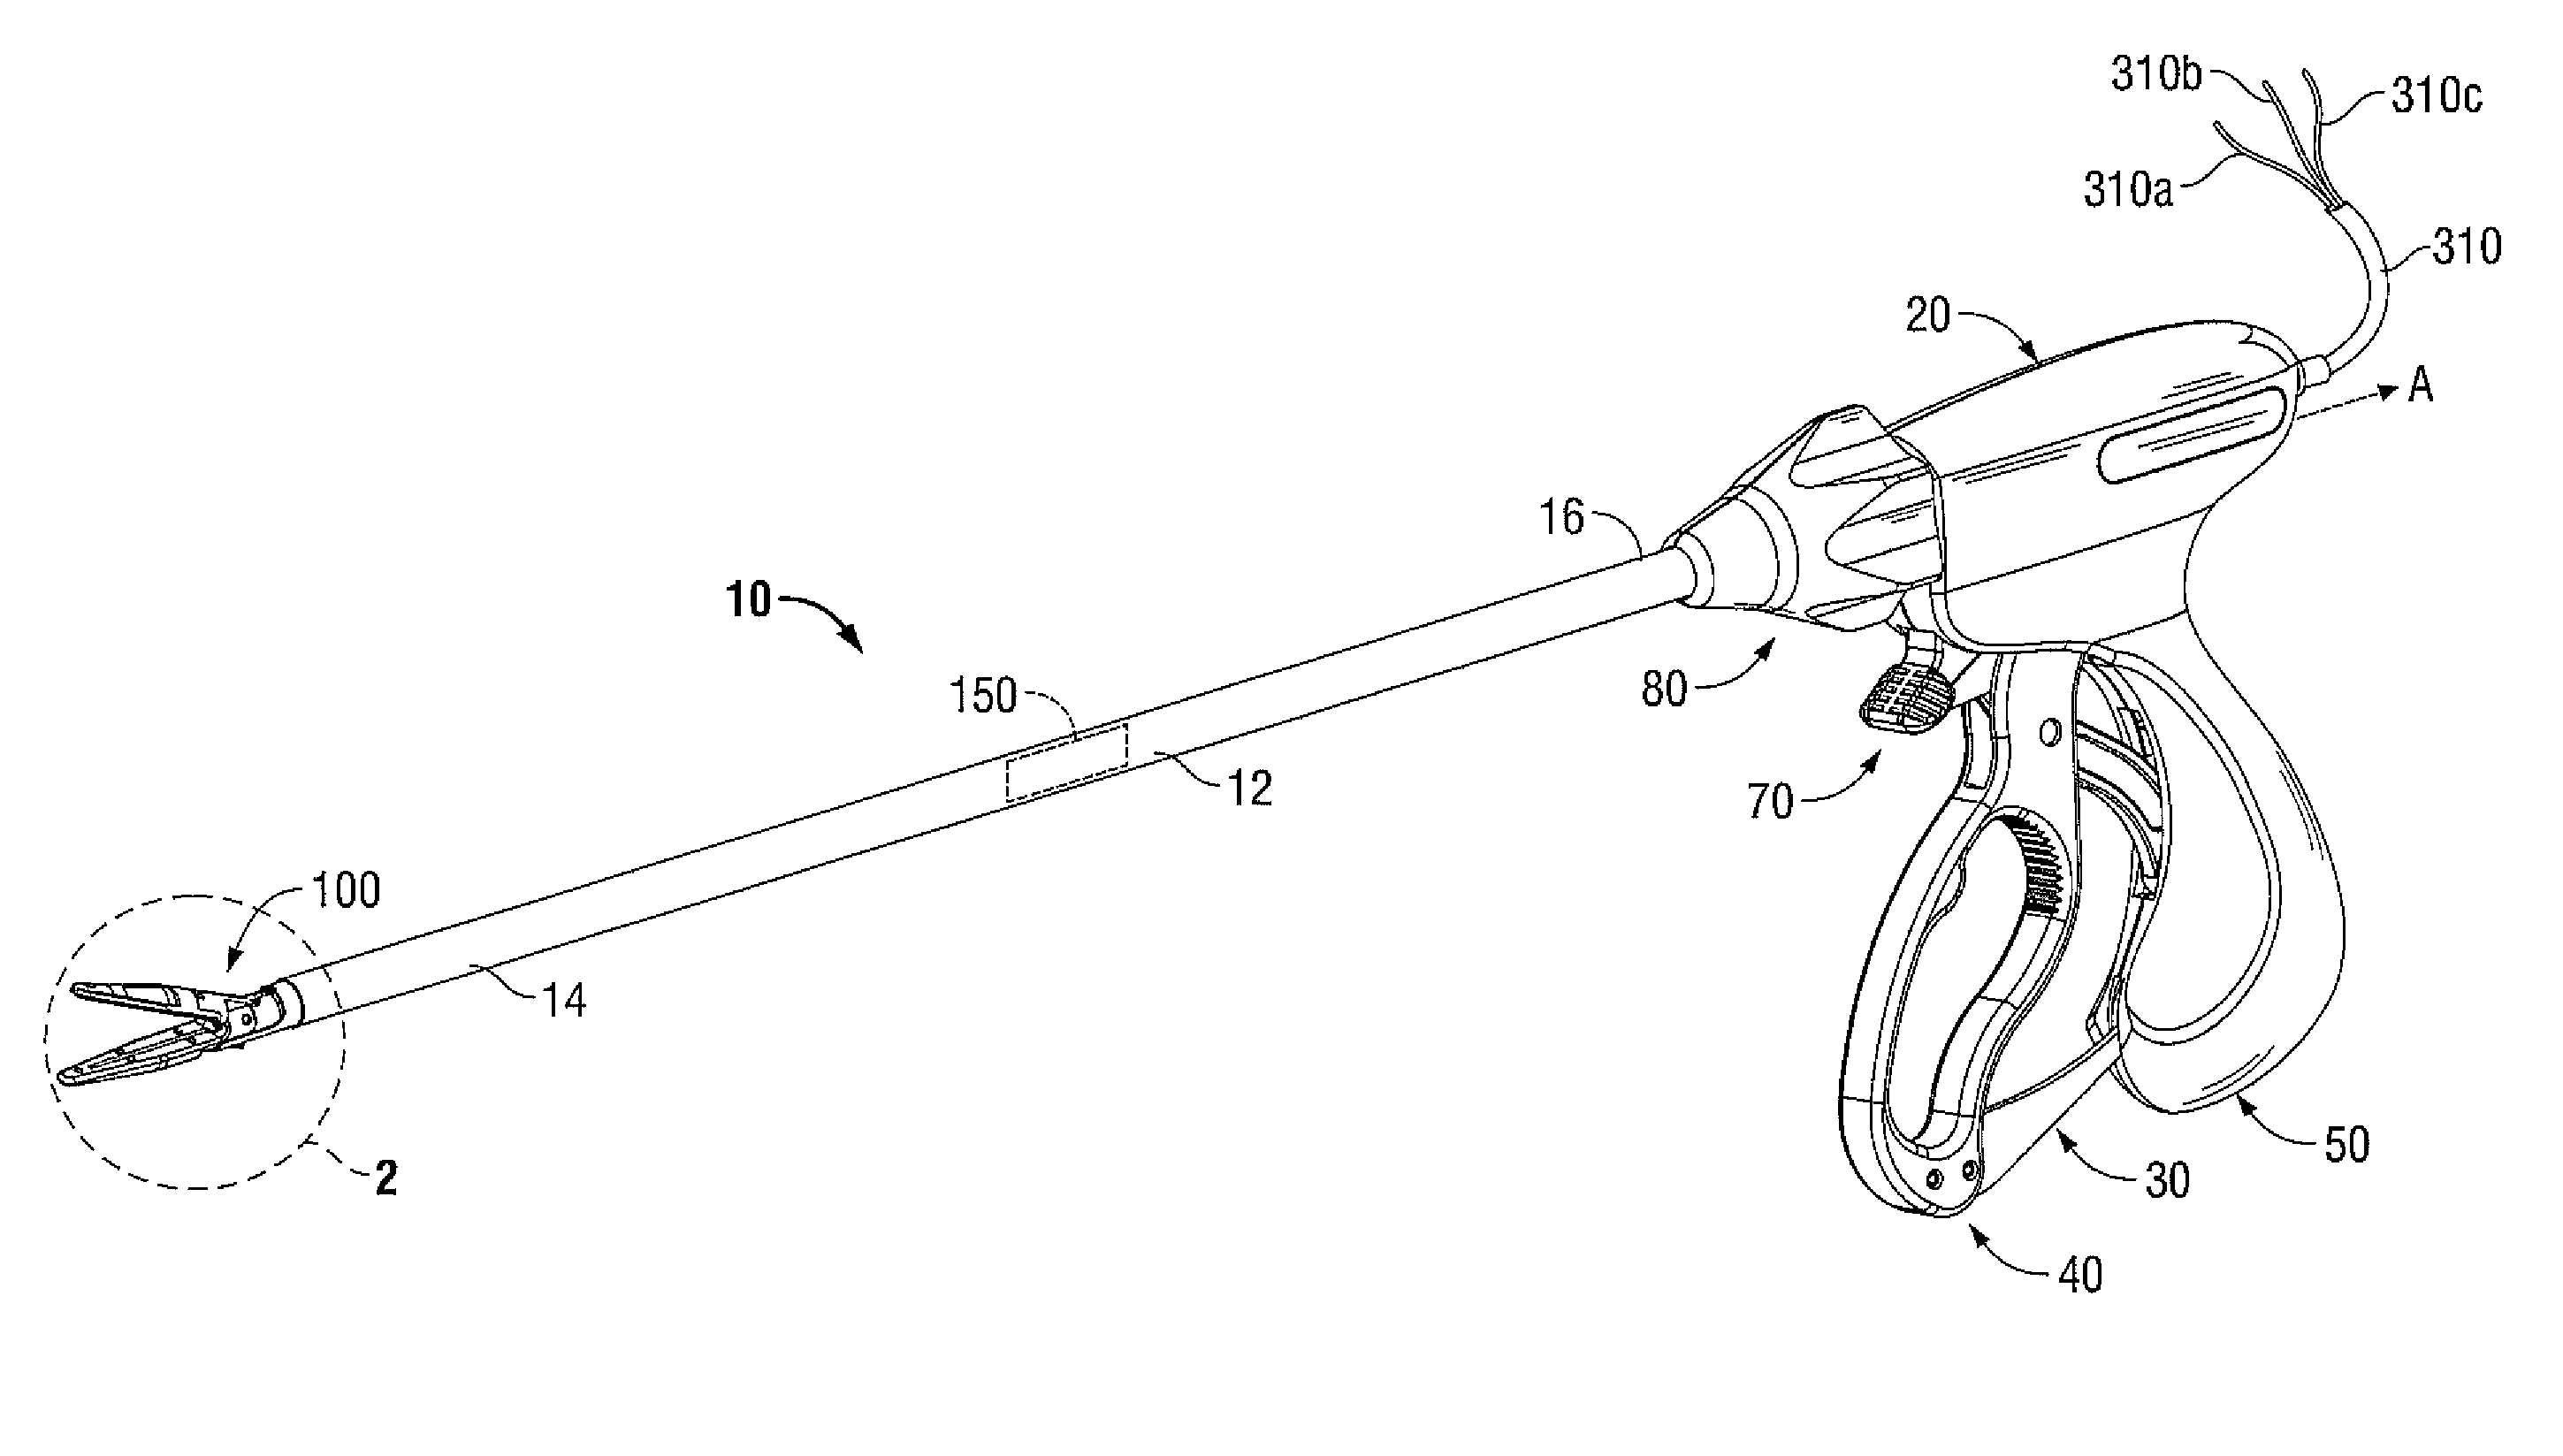 Apparatus, system, and method for performing an endoscopic electrosurgical procedure